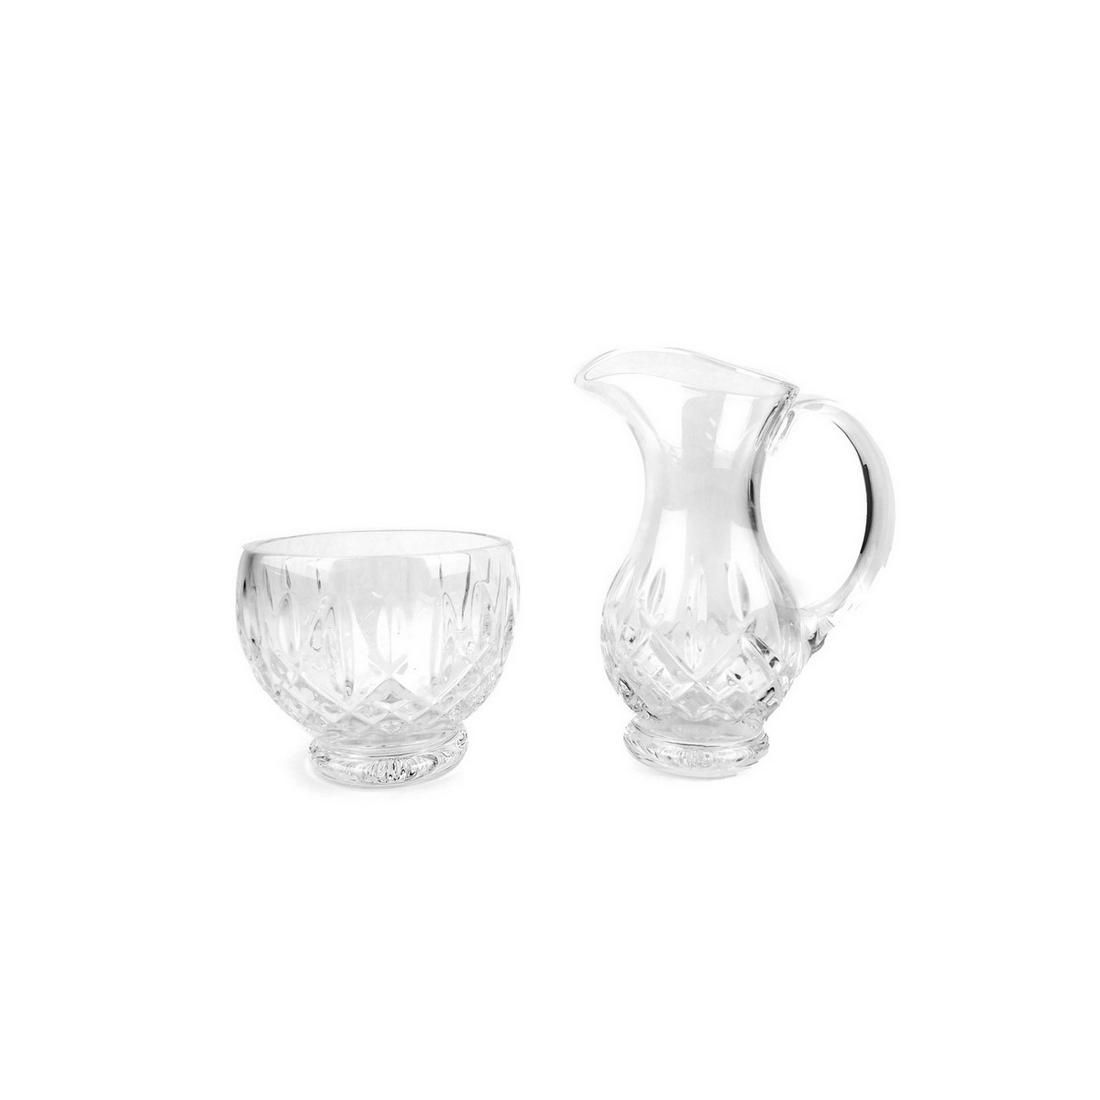 WATERFORD CREAMER AND SUGARWaterford 3d267d